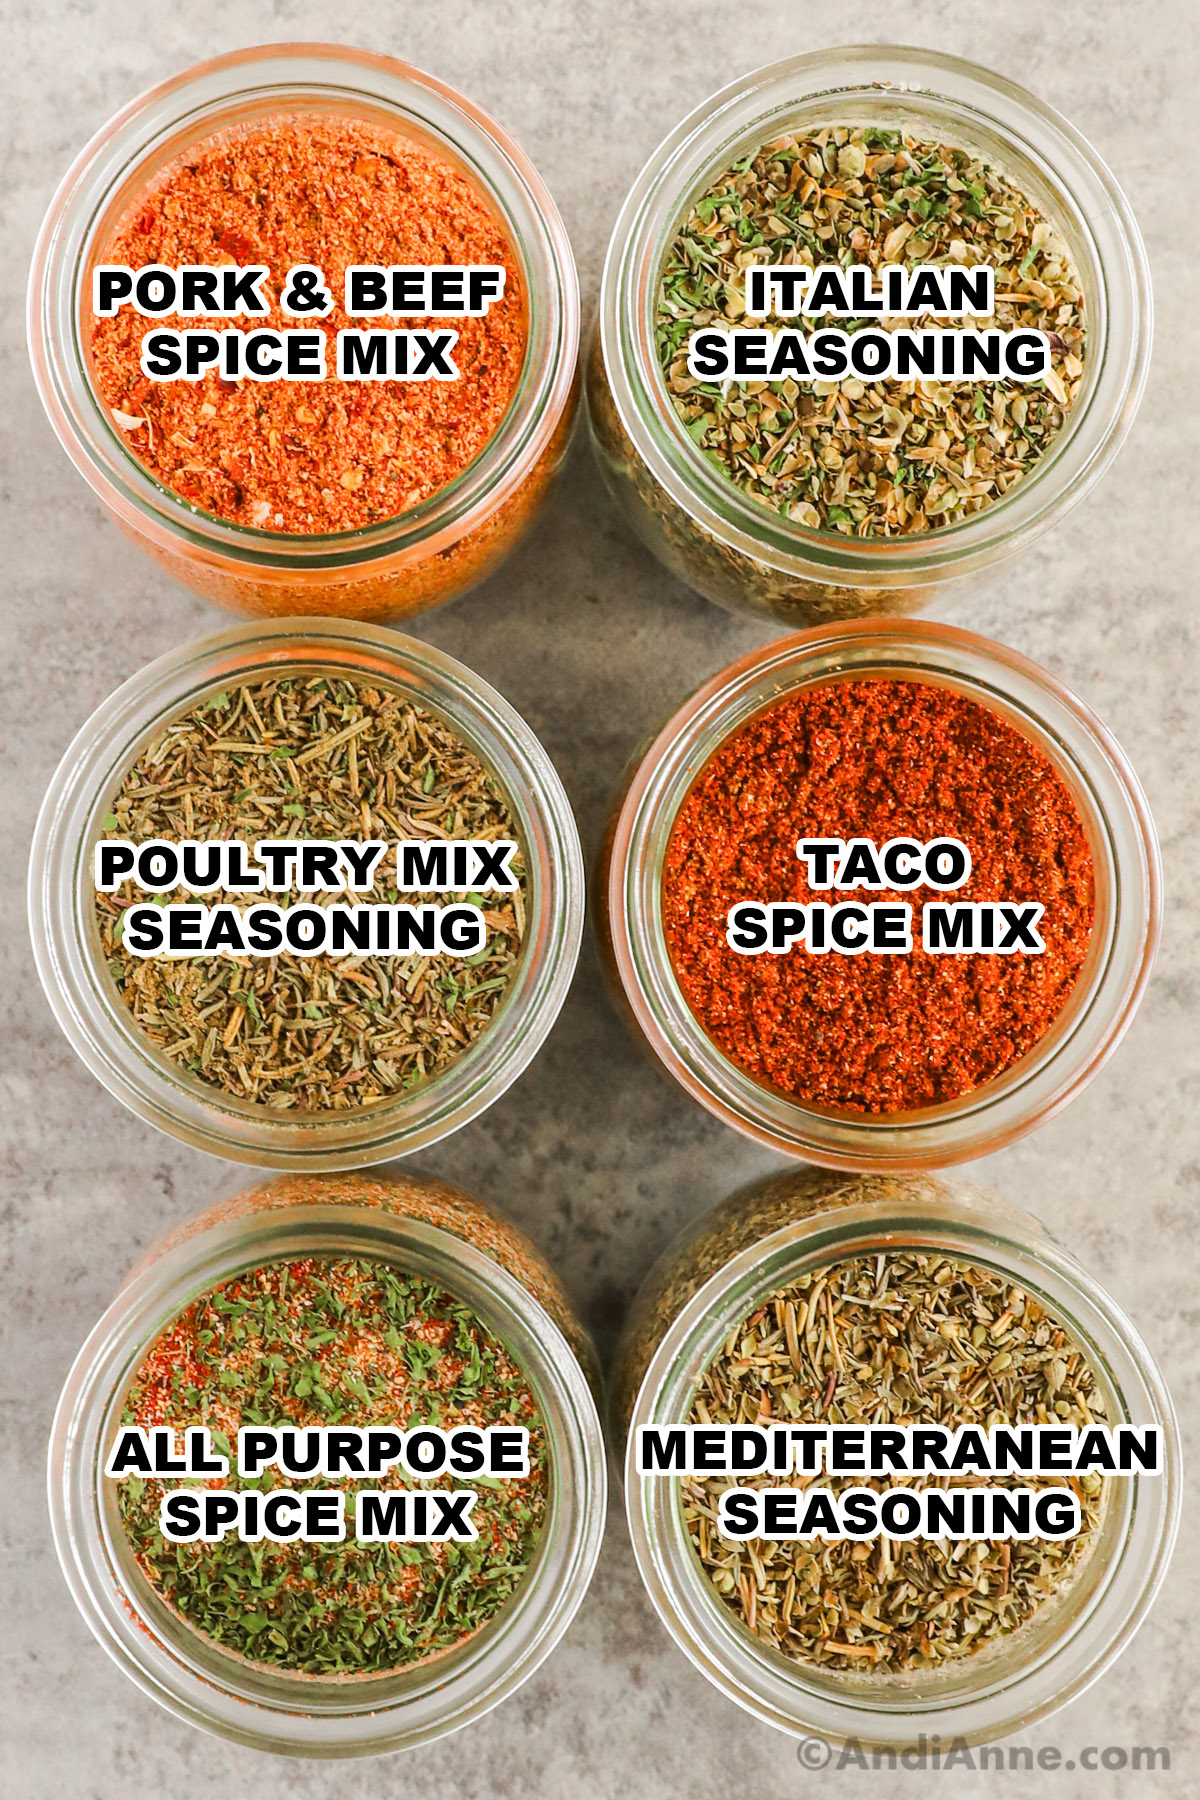 Jars of spice mixes including pork and beef, italian seasoning, poultry mix, taco seasoning, all purpose mix, and mediterranean mix.